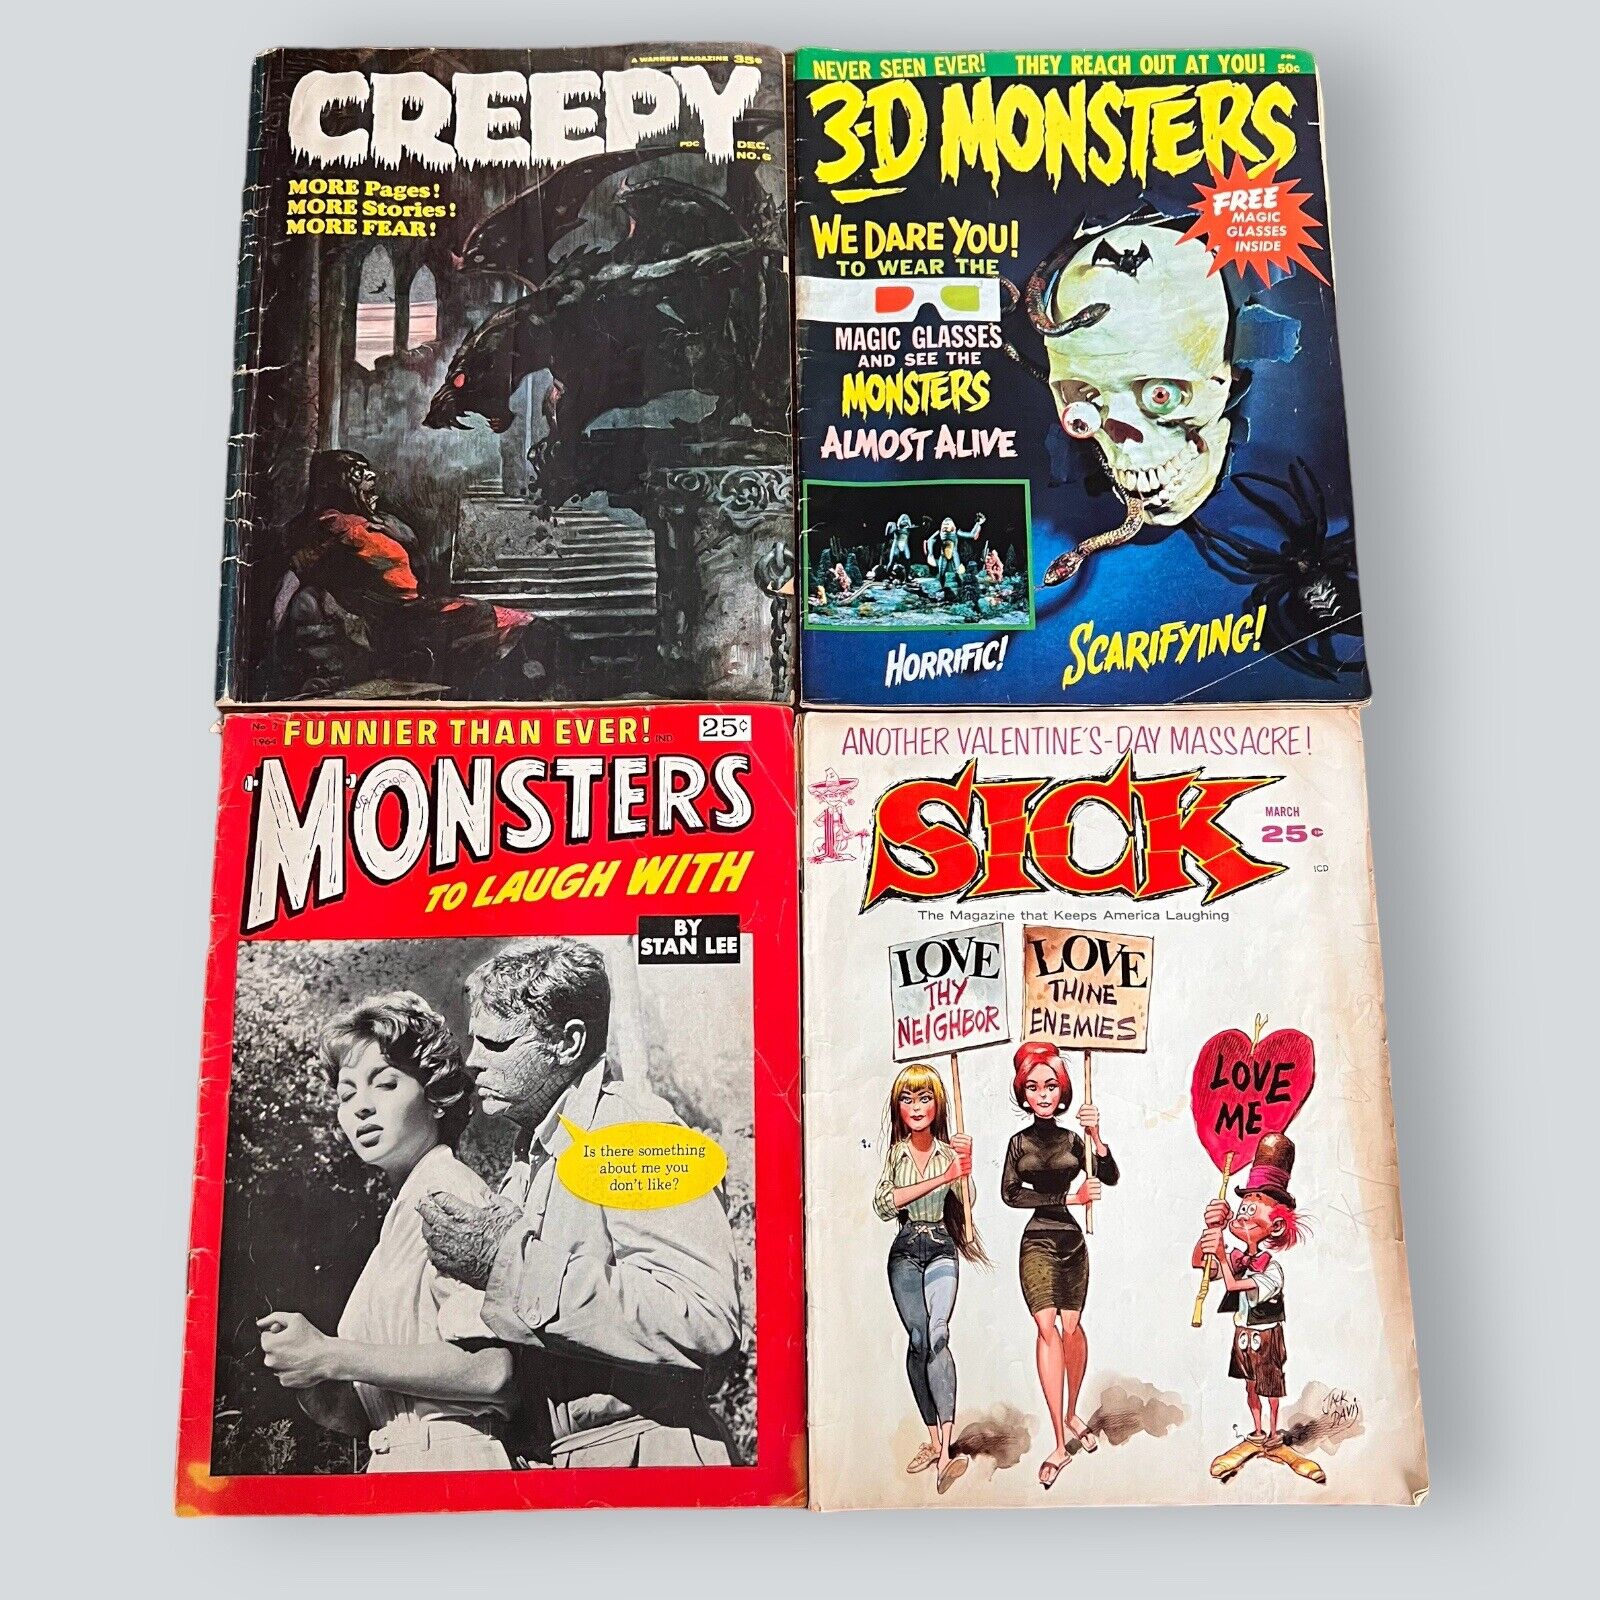 1964 3-D MONSTERS MAGAZINE #1 WITH 3-D GLASSES Creepy 60s Horror Lot